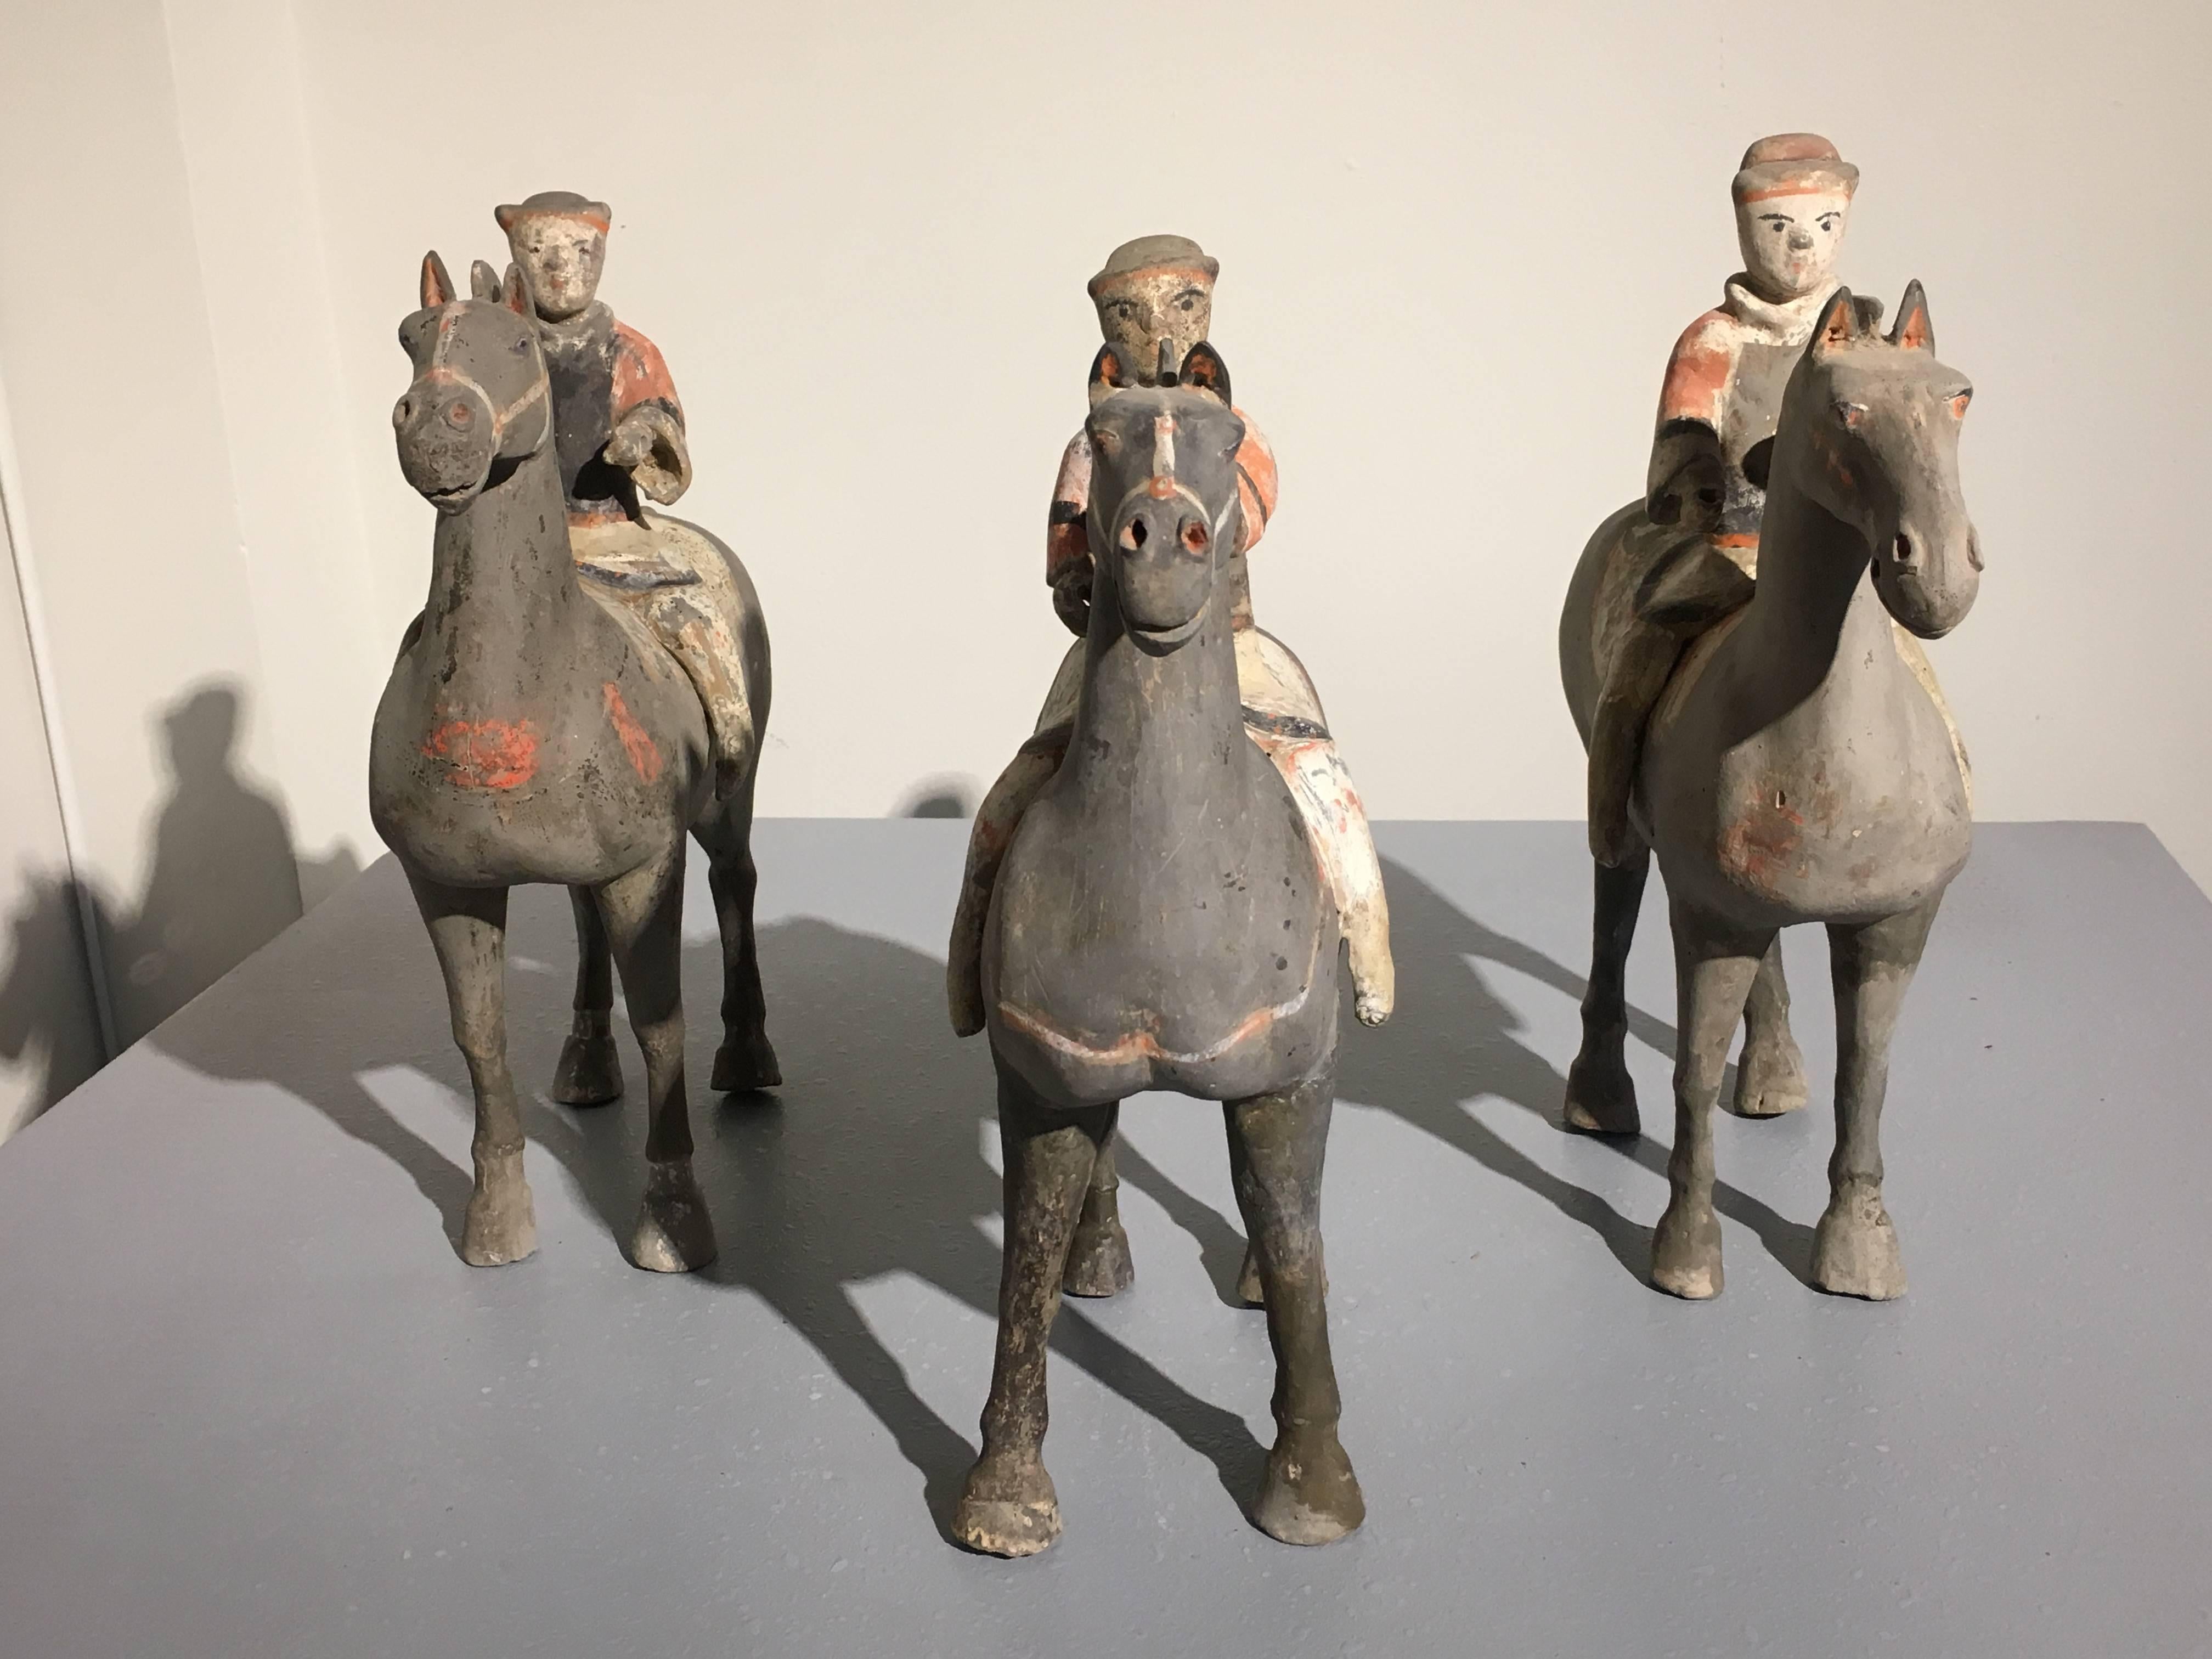 A charming set of three Han dynasty (220 BC-206 AD) painted pottery horse and riders. Representing soldiers, the figures are depicted in a riding stance, with painted armor. The horses stand foursquare with painted bridles and saddles.
Each TL